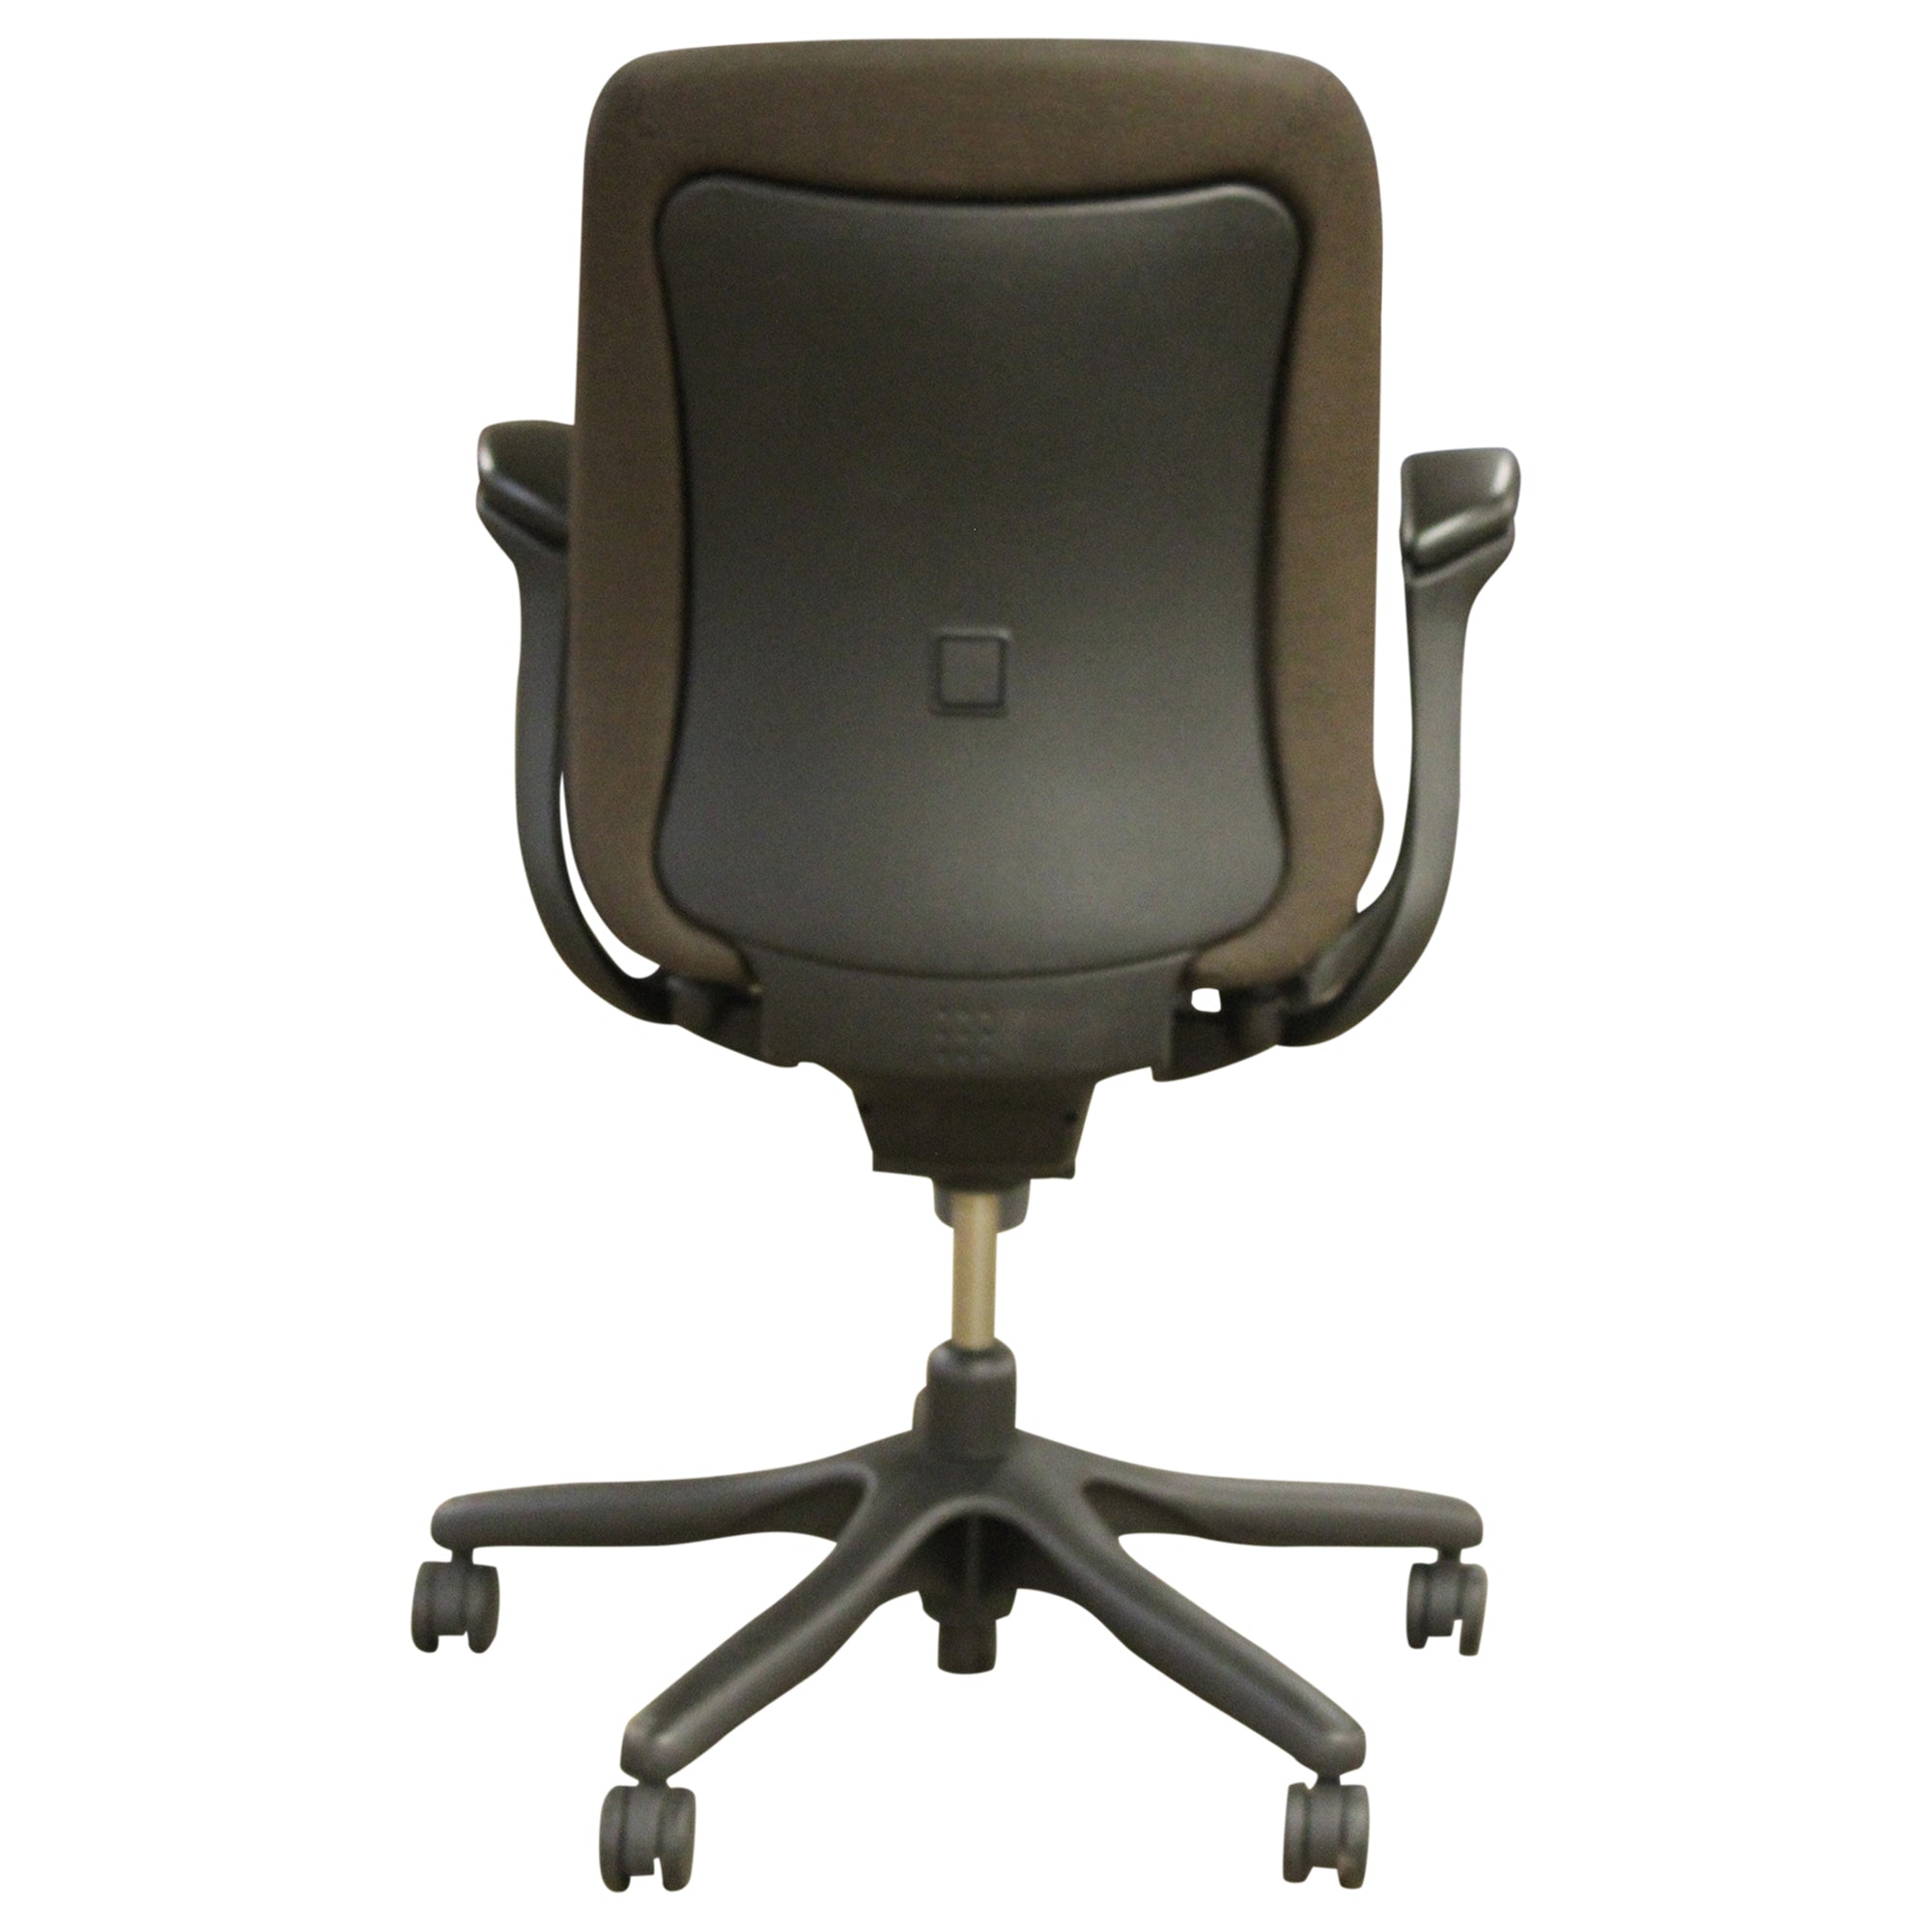 Teknion Amicus Task Chair - Brown -  Preowned